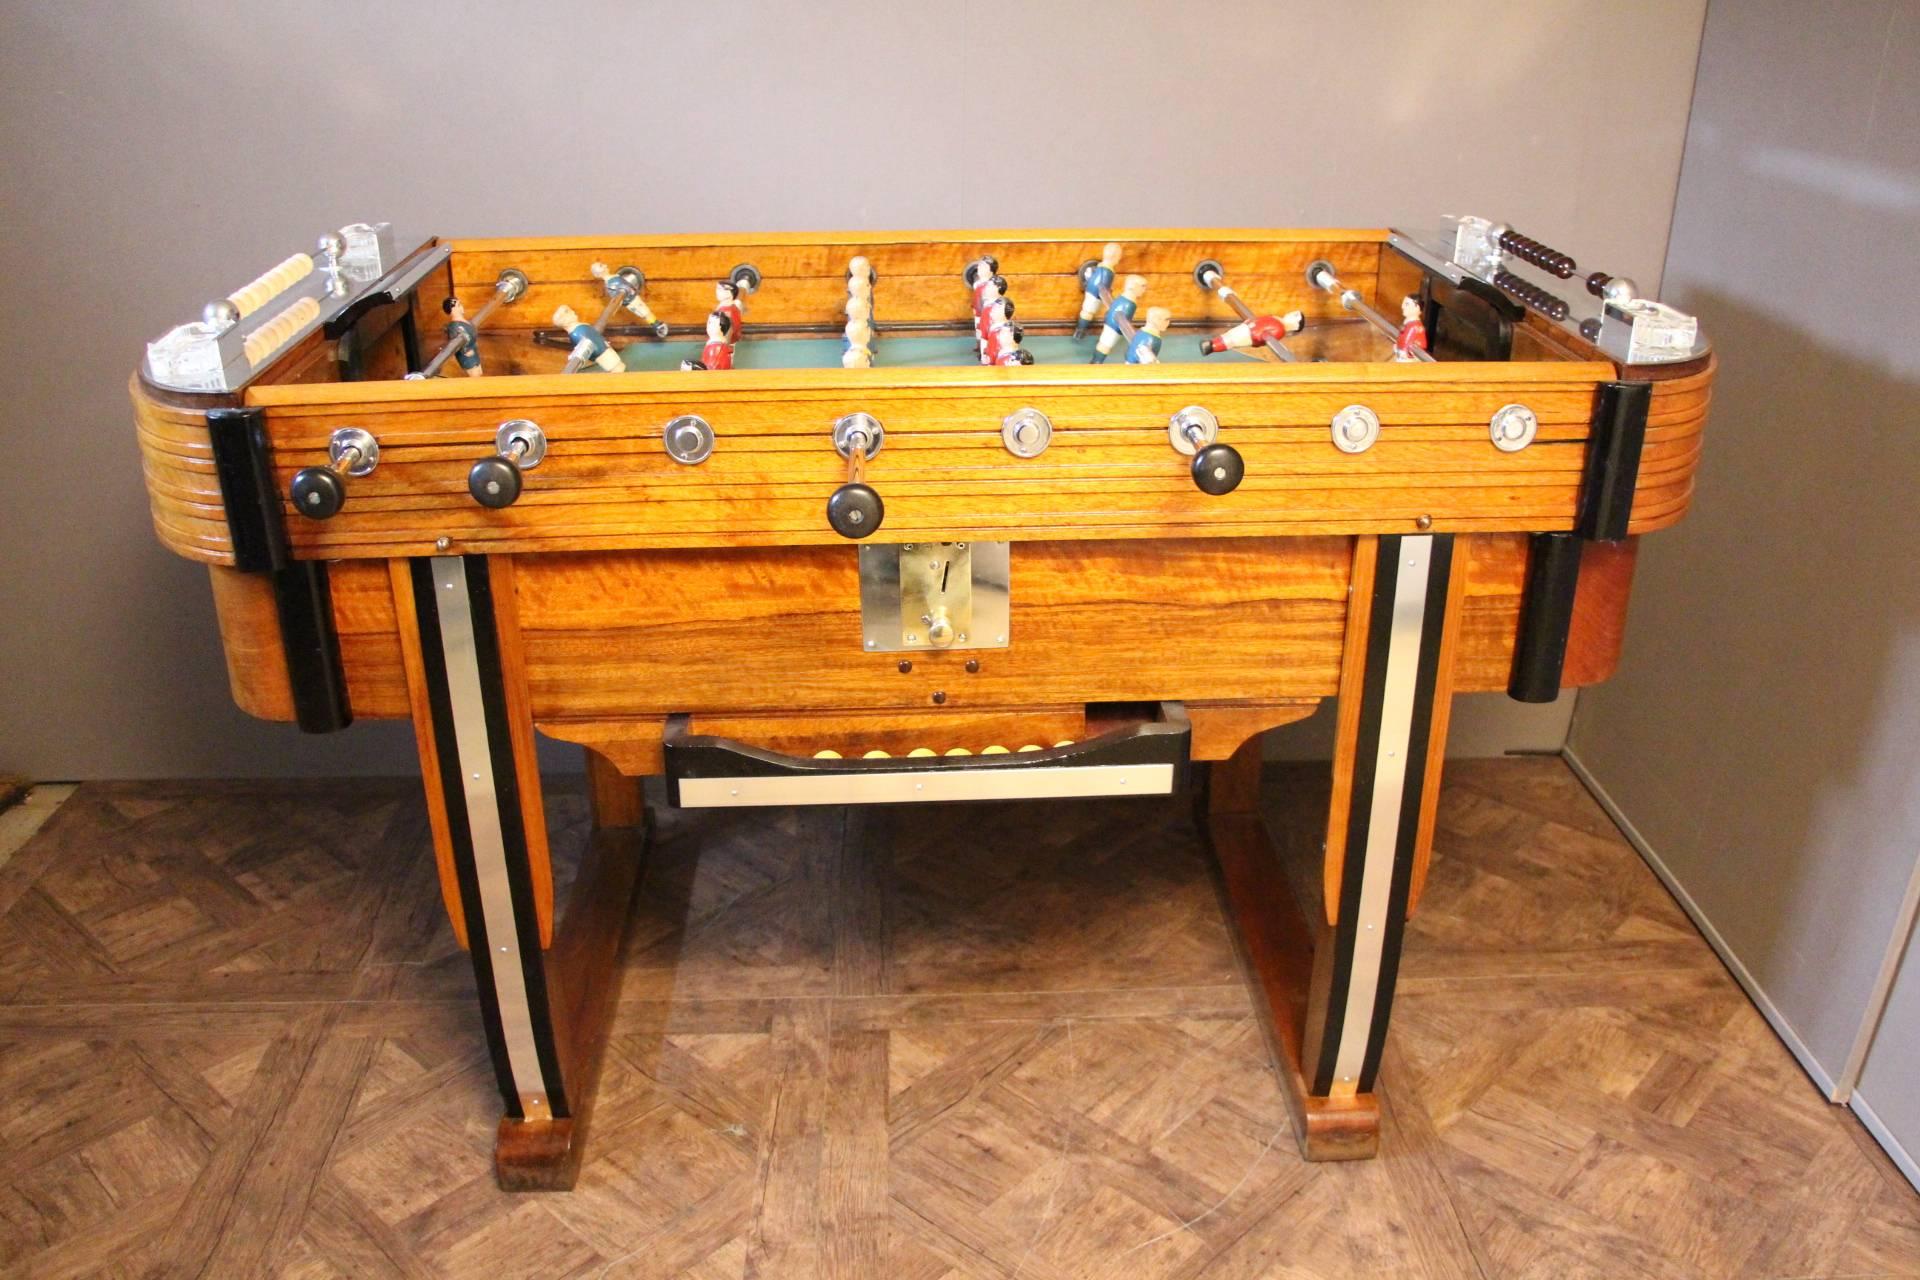 Very nice foosball table in light color wood and blackened wood as well as polished aluminium pieces.
Green playing field, blue and red players. Four crystal ashtrays by Lalique.
Working coin operating.
It is in perfect working order and moreover